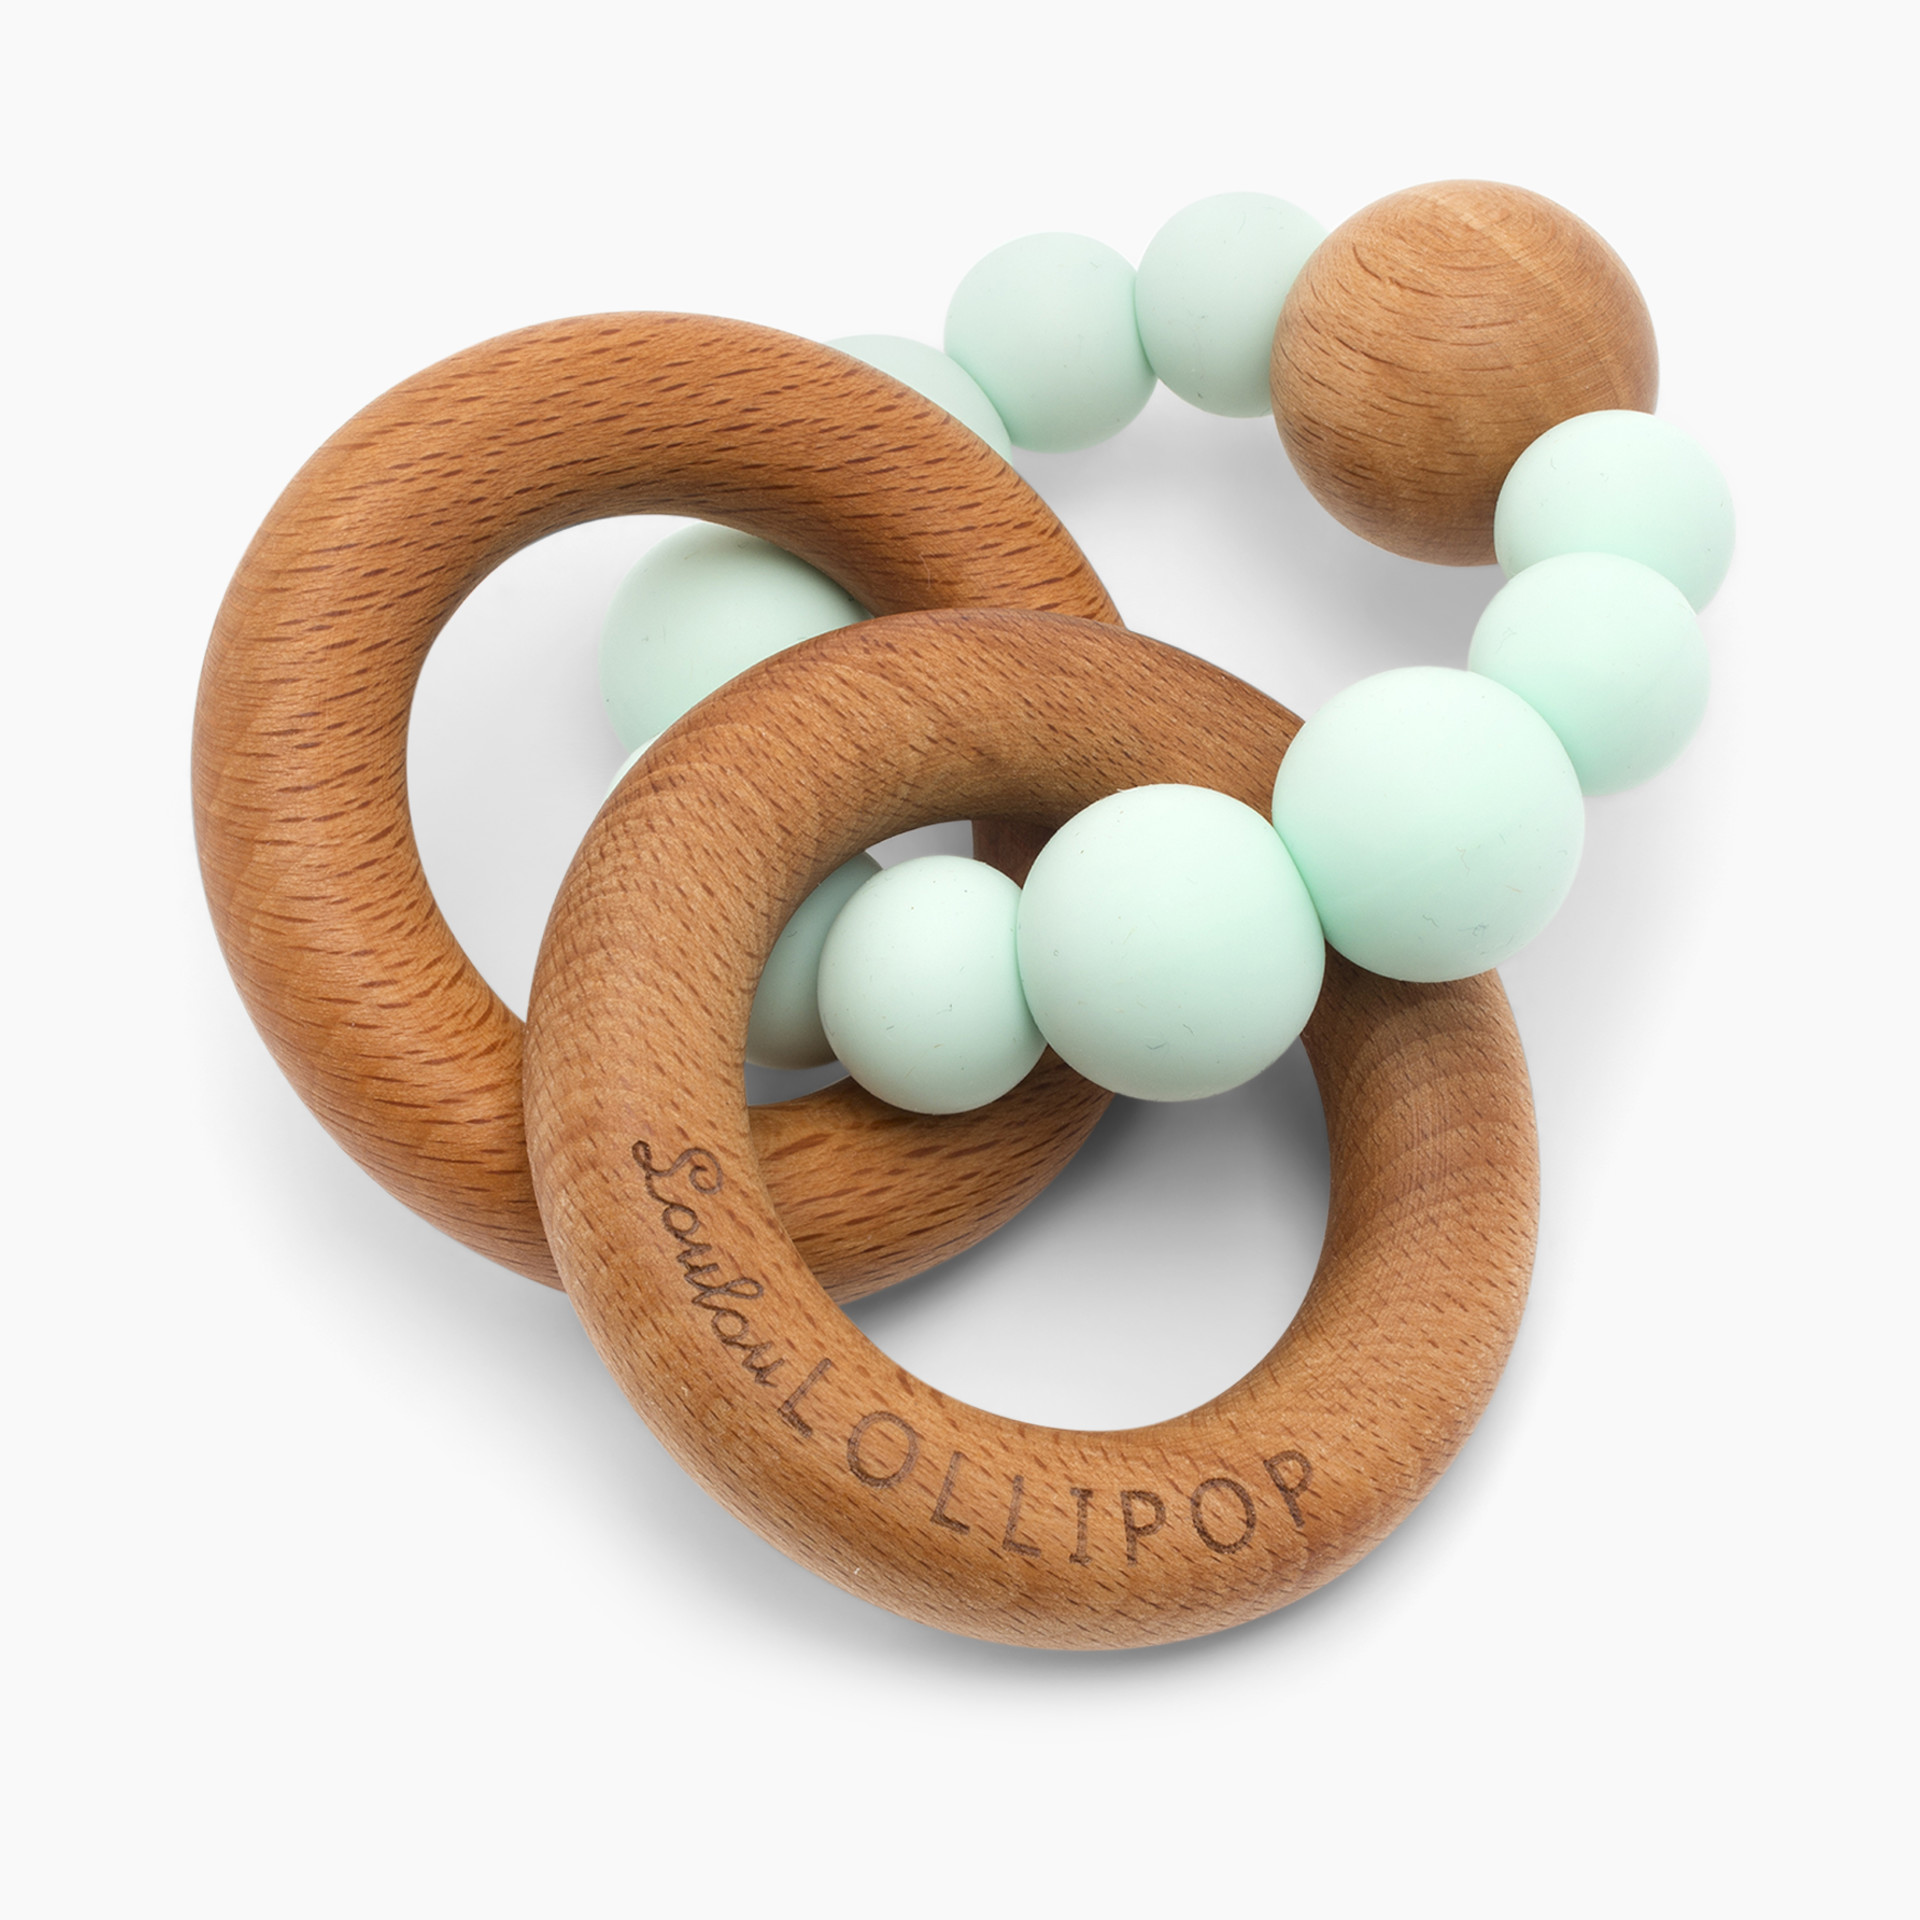 Pink Wooden Teether Rattle – Mike&Jewls